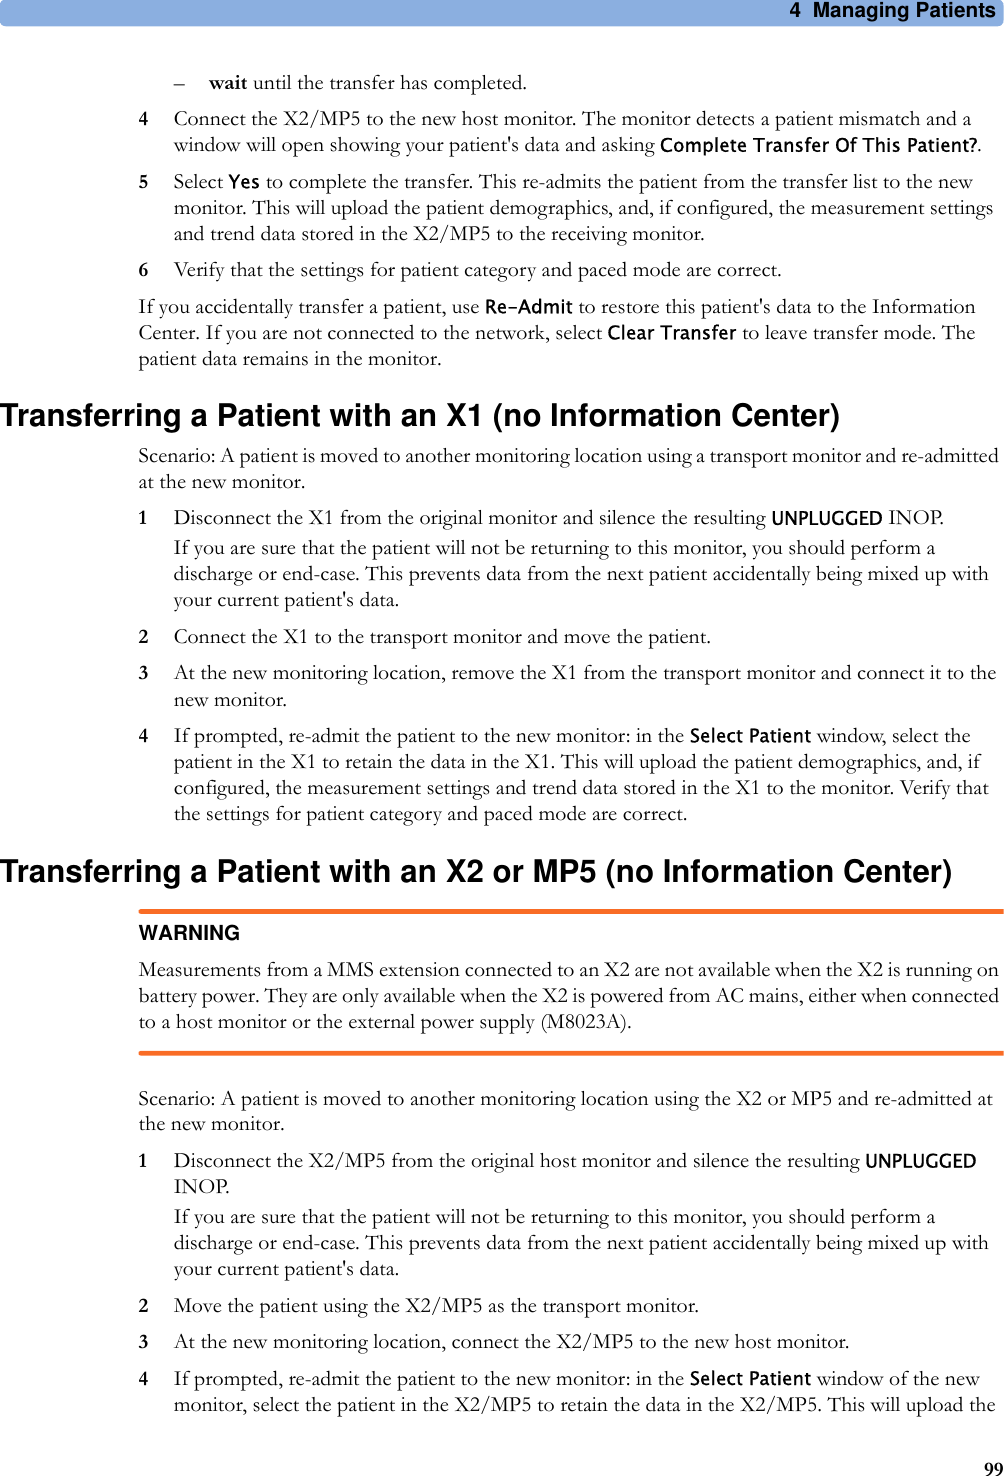 4 Managing Patients99–wait until the transfer has completed.4Connect the X2/MP5 to the new host monitor. The monitor detects a patient mismatch and a window will open showing your patient&apos;s data and asking Complete Transfer Of This Patient?.5Select Yes to complete the transfer. This re-admits the patient from the transfer list to the new monitor. This will upload the patient demographics, and, if configured, the measurement settings and trend data stored in the X2/MP5 to the receiving monitor.6Verify that the settings for patient category and paced mode are correct.If you accidentally transfer a patient, use Re-Admit to restore this patient&apos;s data to the Information Center. If you are not connected to the network, select Clear Transfer to leave transfer mode. The patient data remains in the monitor.Transferring a Patient with an X1 (no Information Center)Scenario: A patient is moved to another monitoring location using a transport monitor and re-admitted at the new monitor.1Disconnect the X1 from the original monitor and silence the resulting UNPLUGGED INOP.If you are sure that the patient will not be returning to this monitor, you should perform a discharge or end-case. This prevents data from the next patient accidentally being mixed up with your current patient&apos;s data.2Connect the X1 to the transport monitor and move the patient.3At the new monitoring location, remove the X1 from the transport monitor and connect it to the new monitor.4If prompted, re-admit the patient to the new monitor: in the Select Patient window, select the patient in the X1 to retain the data in the X1. This will upload the patient demographics, and, if configured, the measurement settings and trend data stored in the X1 to the monitor. Verify that the settings for patient category and paced mode are correct.Transferring a Patient with an X2 or MP5 (no Information Center)WARNINGMeasurements from a MMS extension connected to an X2 are not available when the X2 is running on battery power. They are only available when the X2 is powered from AC mains, either when connected to a host monitor or the external power supply (M8023A).Scenario: A patient is moved to another monitoring location using the X2 or MP5 and re-admitted at the new monitor.1Disconnect the X2/MP5 from the original host monitor and silence the resulting UNPLUGGED INOP.If you are sure that the patient will not be returning to this monitor, you should perform a discharge or end-case. This prevents data from the next patient accidentally being mixed up with your current patient&apos;s data.2Move the patient using the X2/MP5 as the transport monitor.3At the new monitoring location, connect the X2/MP5 to the new host monitor.4If prompted, re-admit the patient to the new monitor: in the Select Patient window of the new monitor, select the patient in the X2/MP5 to retain the data in the X2/MP5. This will upload the 